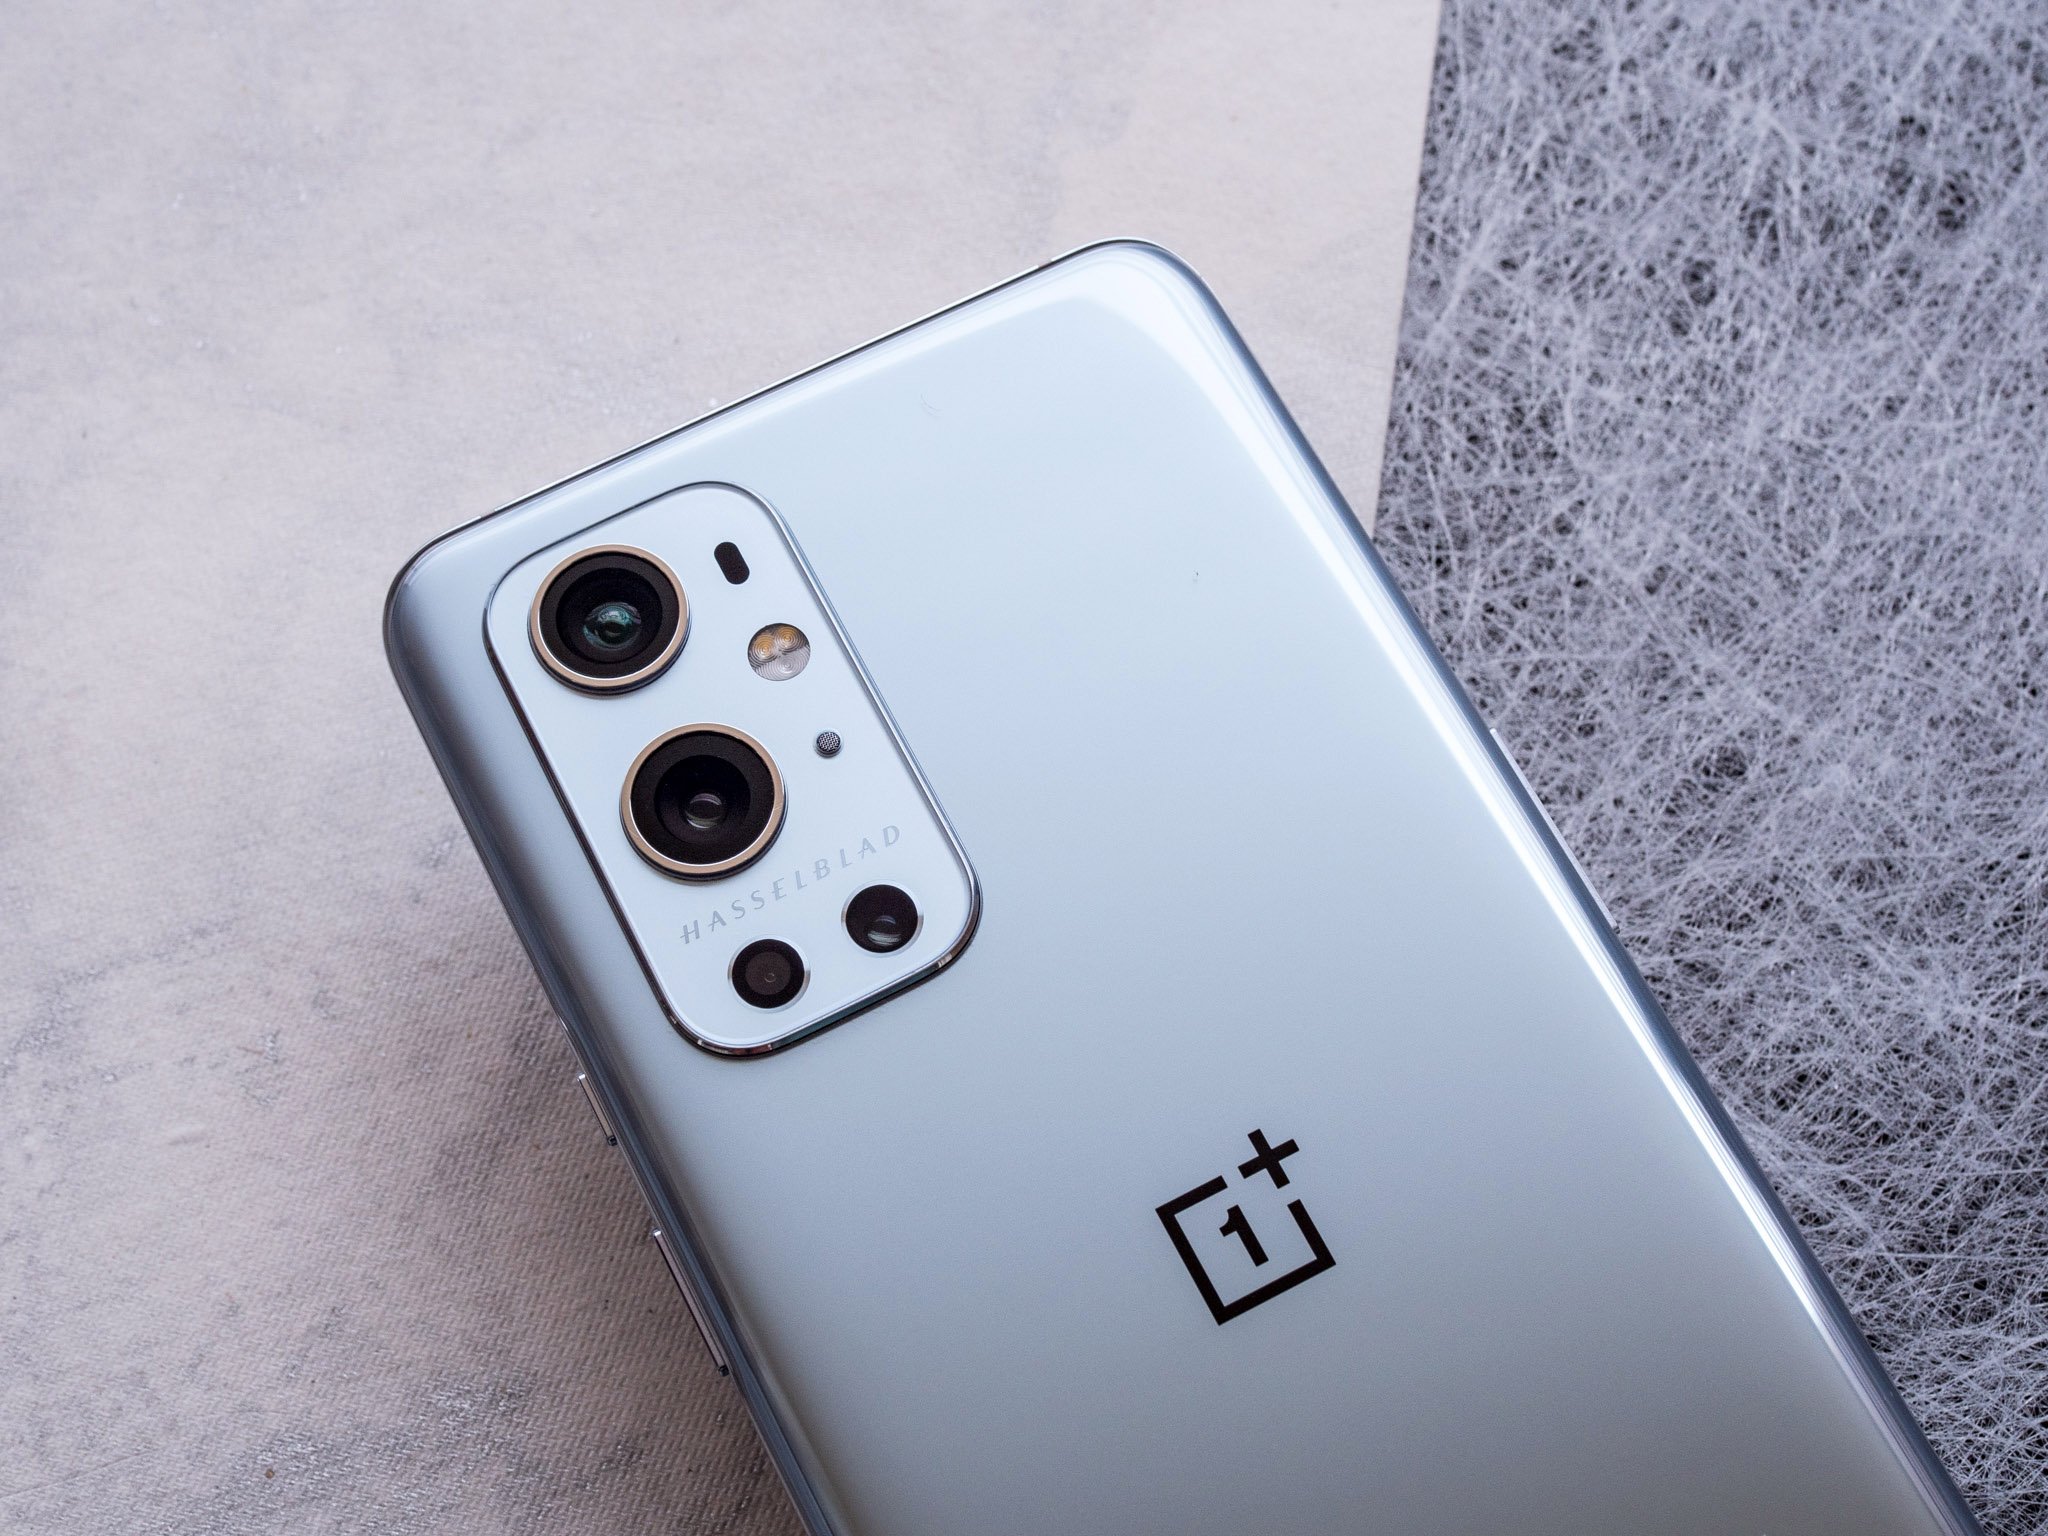 oneplus-9-pro-camera-comparison-how-does-it-hold-up-to-the-competition